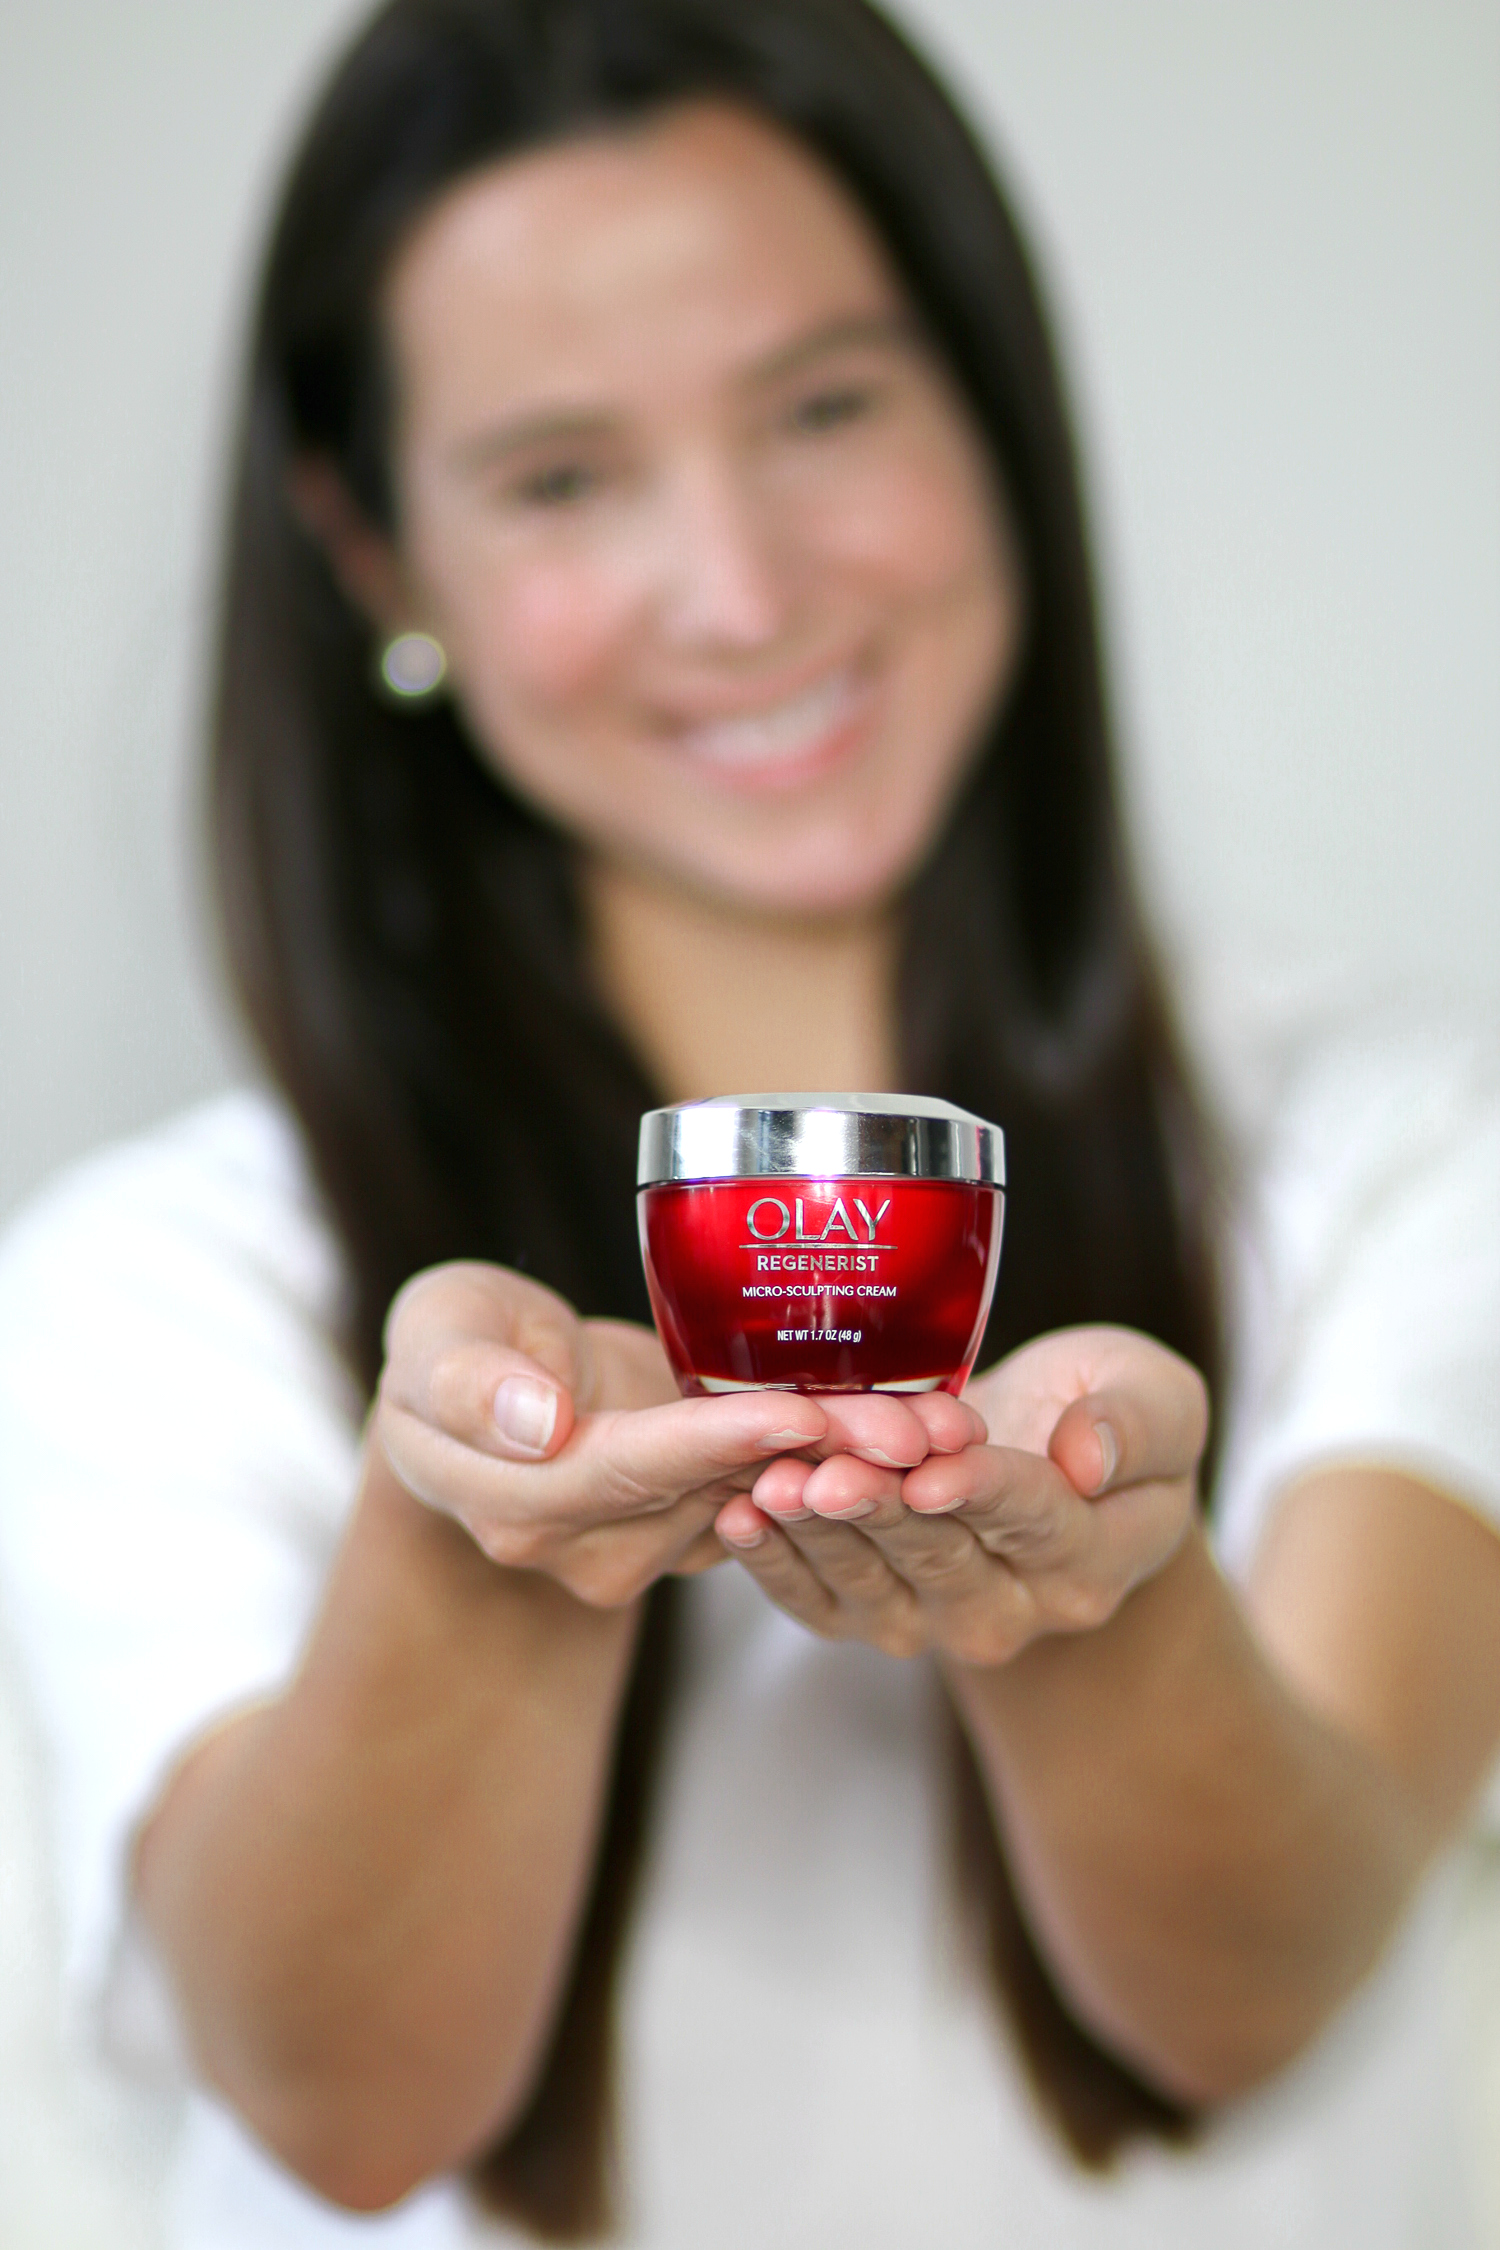 Affordable Anti-Aging Products That Work: Olay Regenerist Micro Sculpting Cream